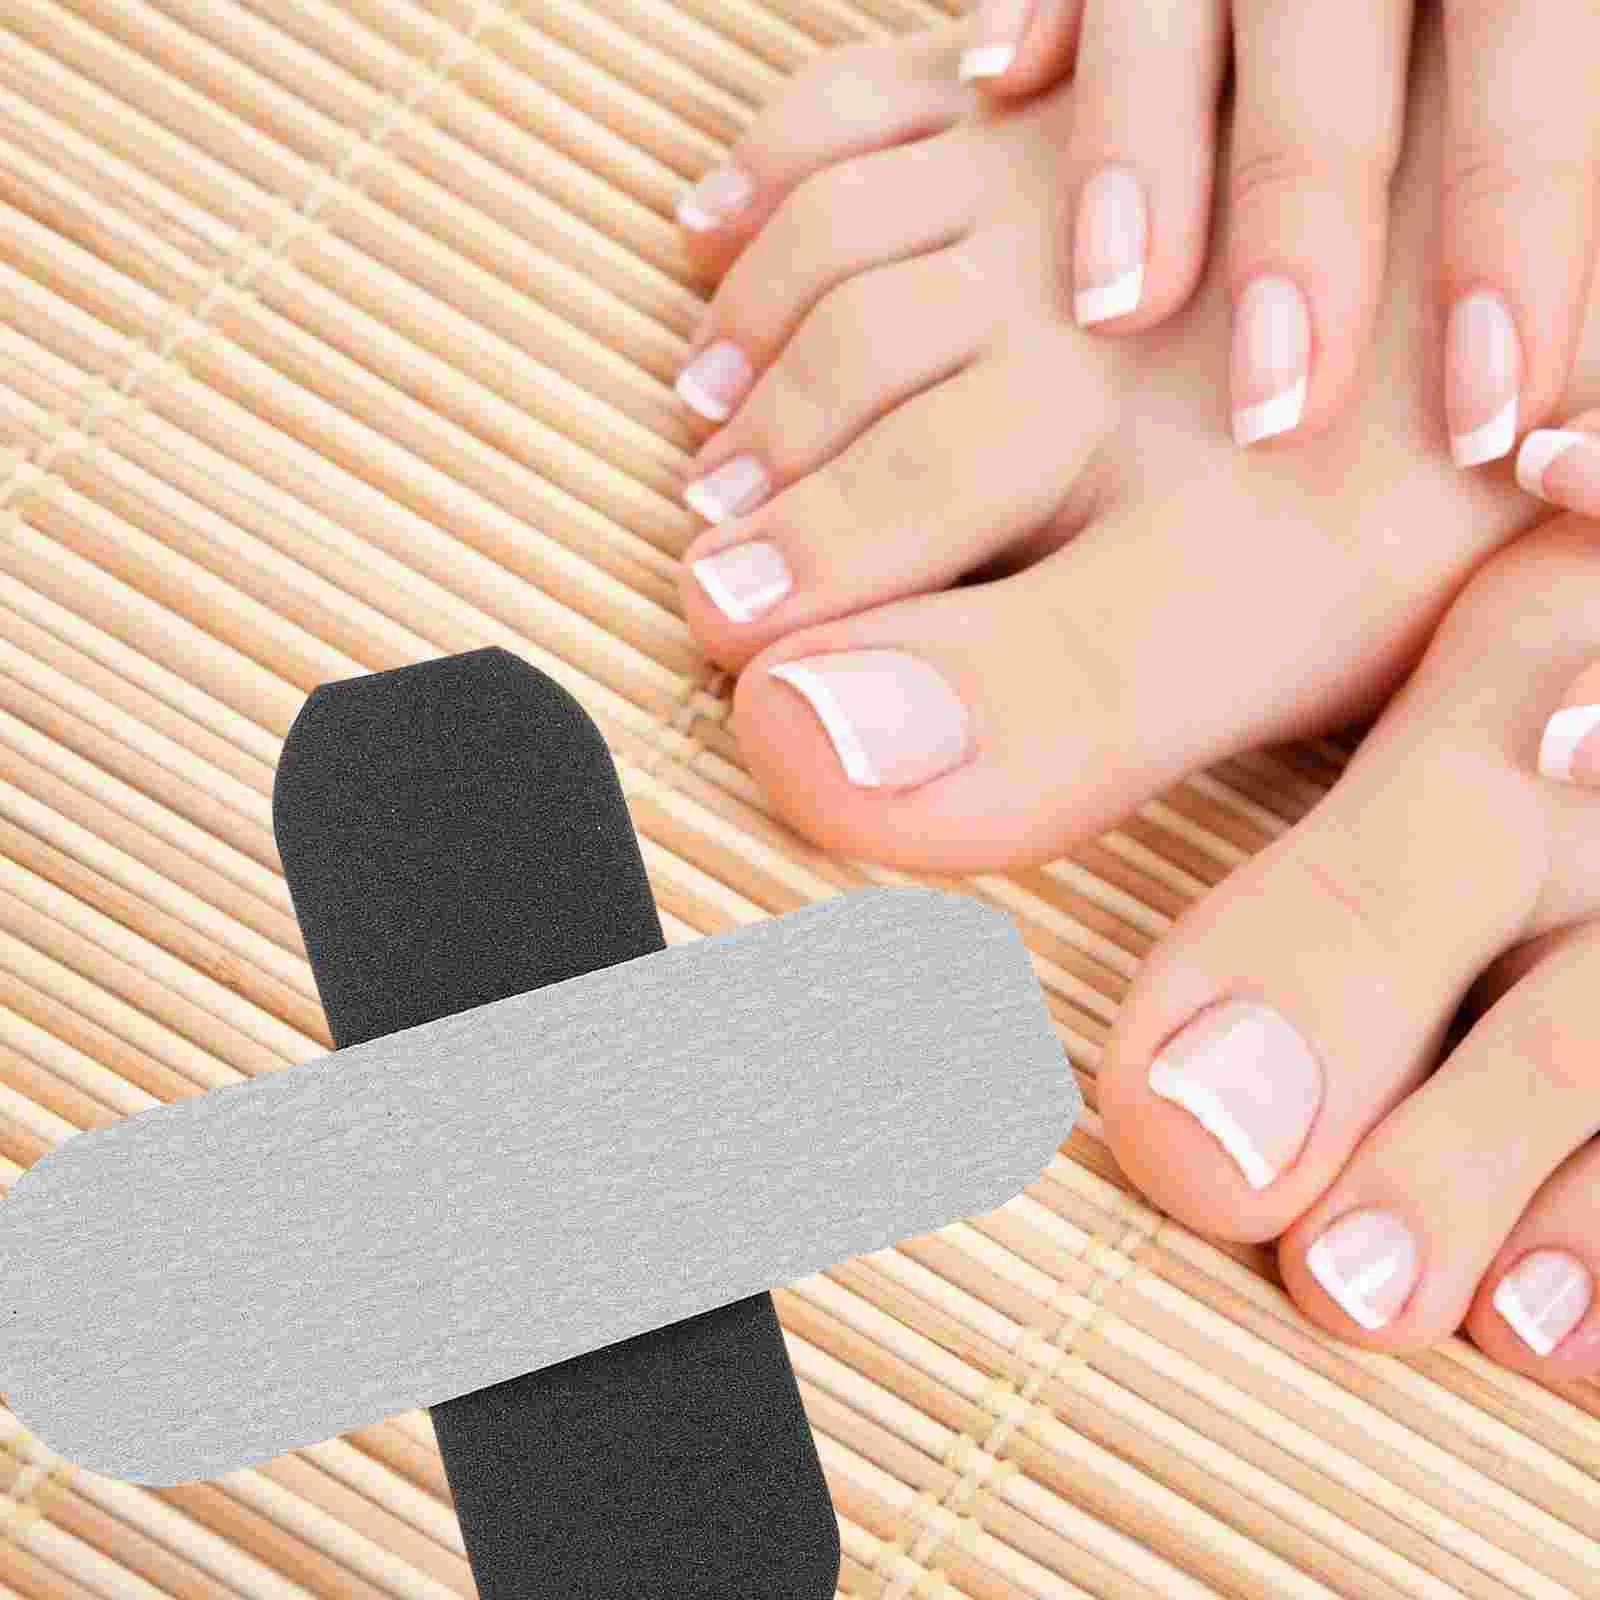 

20 Pcs Foot File Sandpaper Sticker Safe Pedicure Tool Tools Feet Refills Household Dead Skin Remover Supplies Home